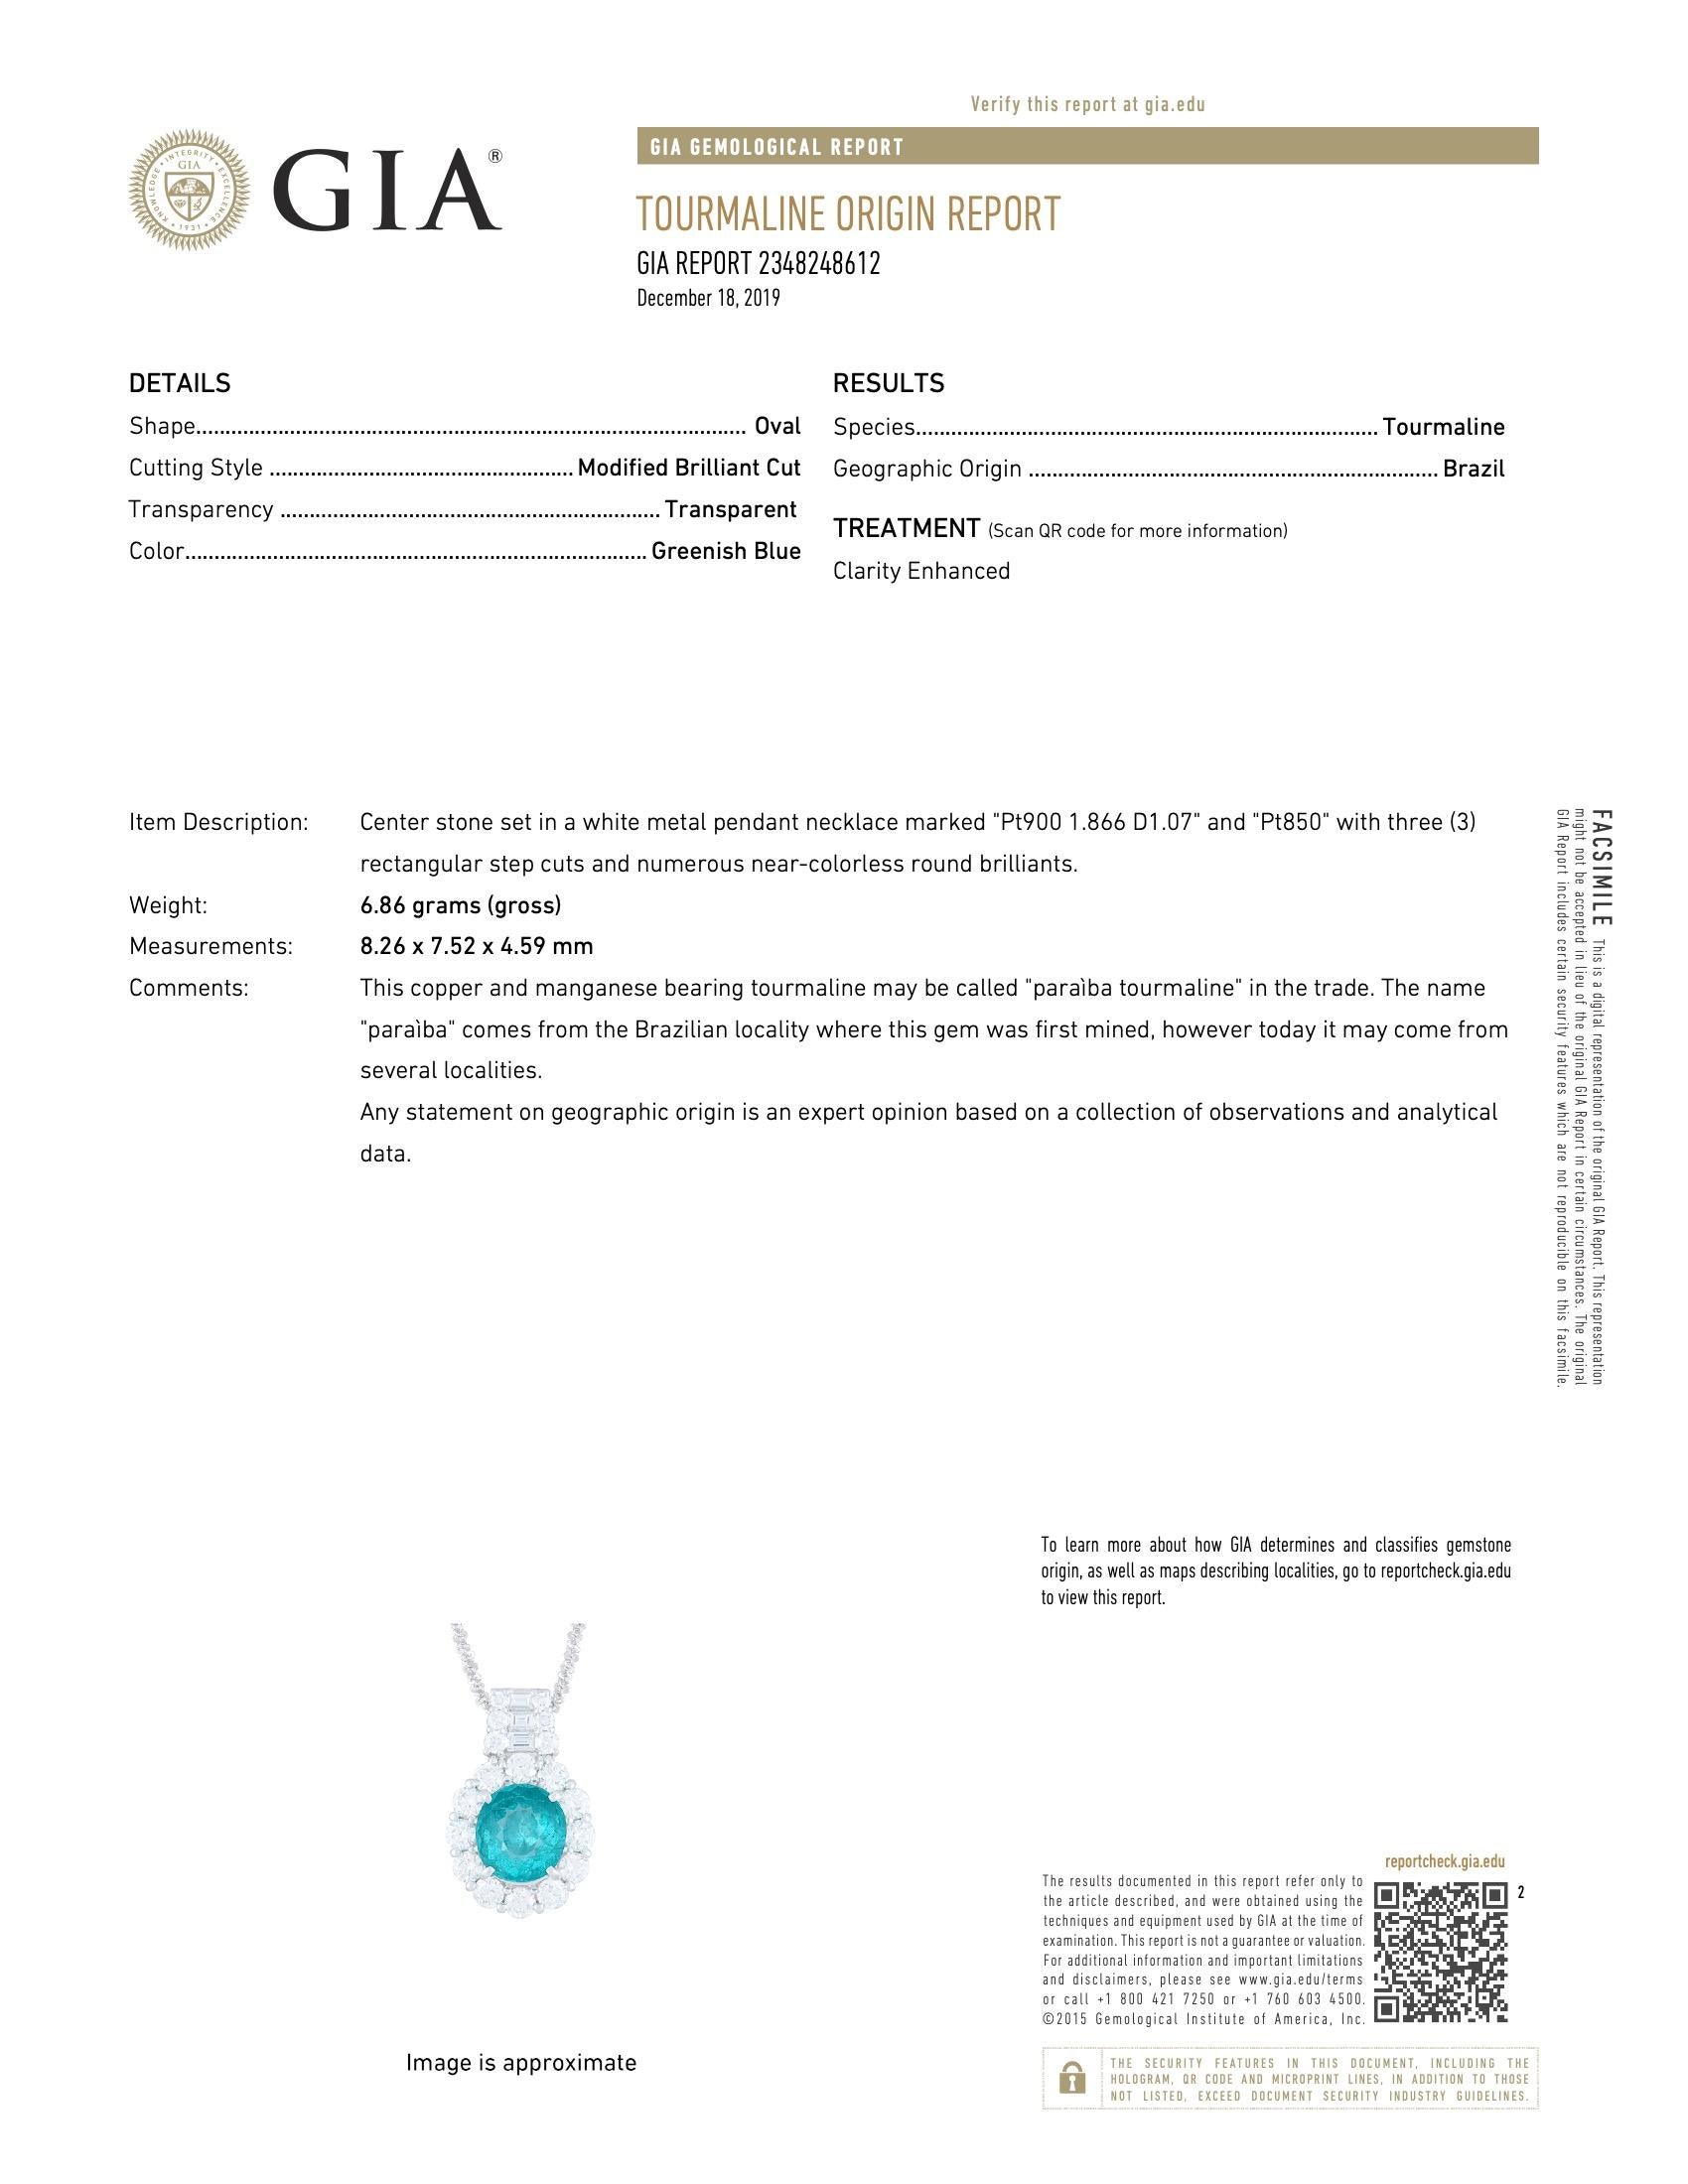 Introducing our exquisite Brazilian Paraiba Tourmaline Diamond Pendant, an unparalleled statement piece crafted to dazzle and impress. The pendant features a rare and stunning 1.87 carat Brazilian Paraiba Tourmaline, certified by the Gemological